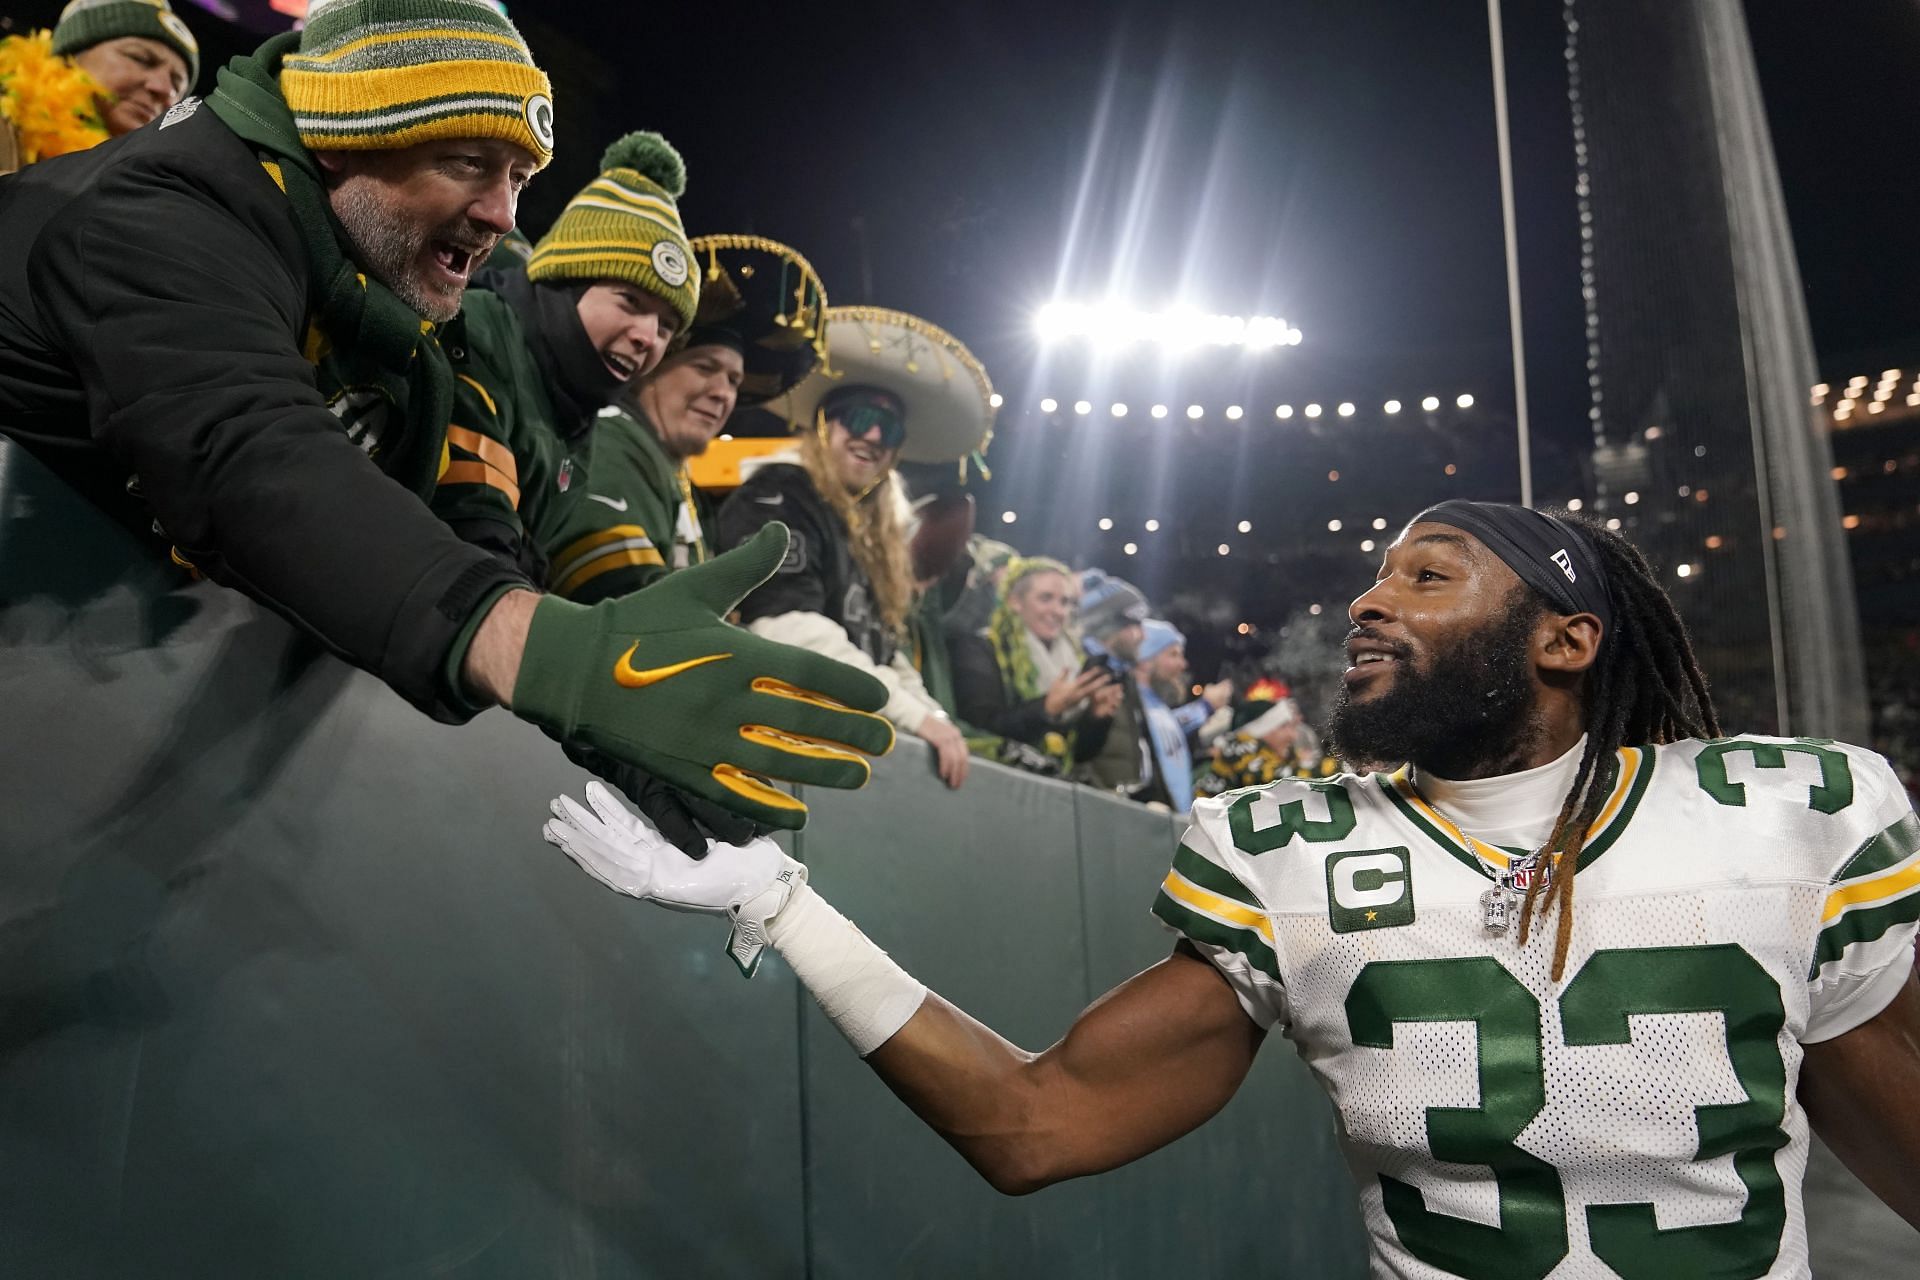 Aaron Jones at Tennessee Titans v Green Bay Packers